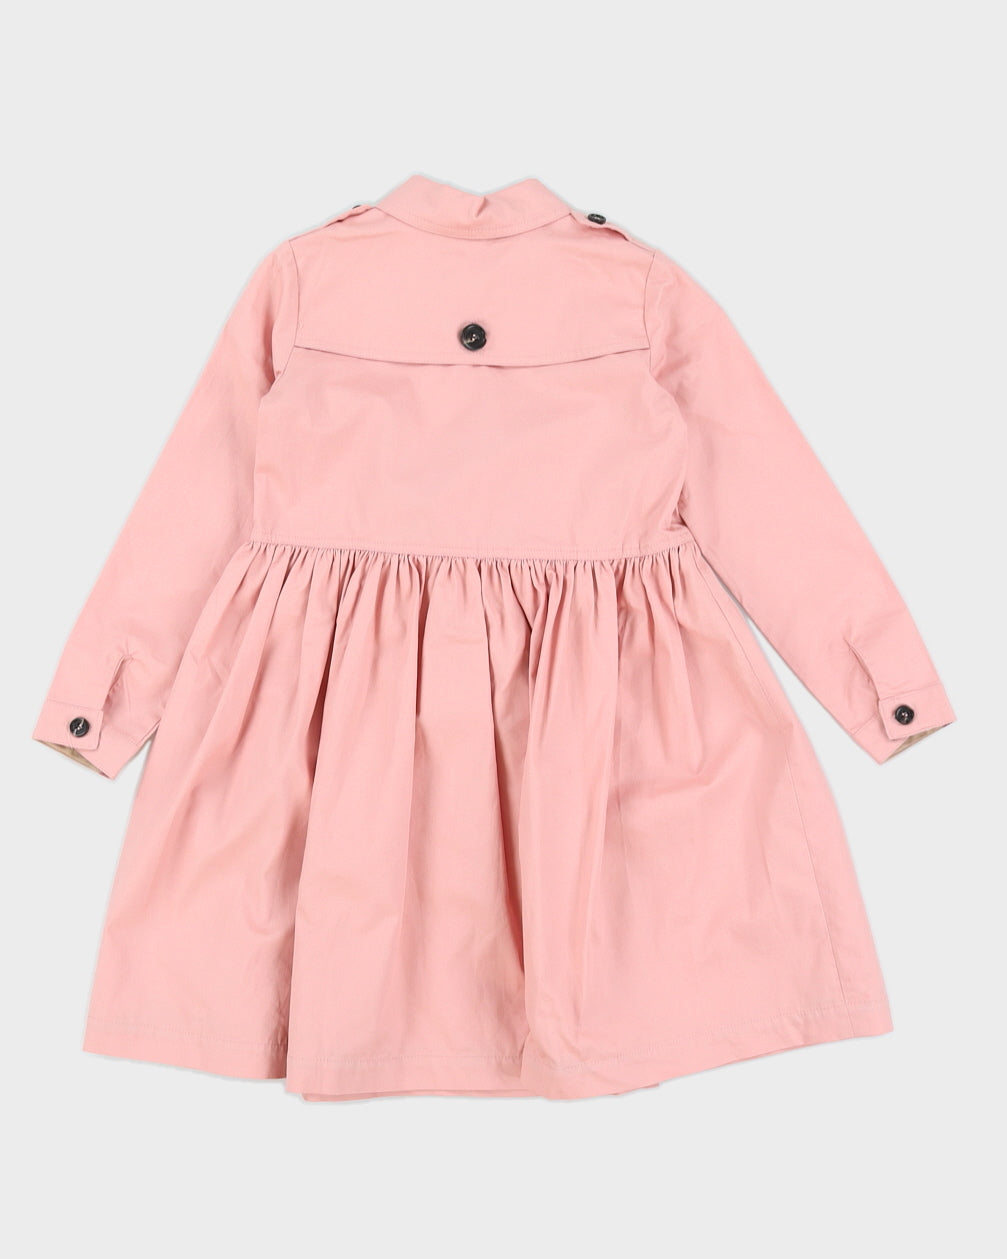 Burberry Pink Double Breasted Dress Jacket